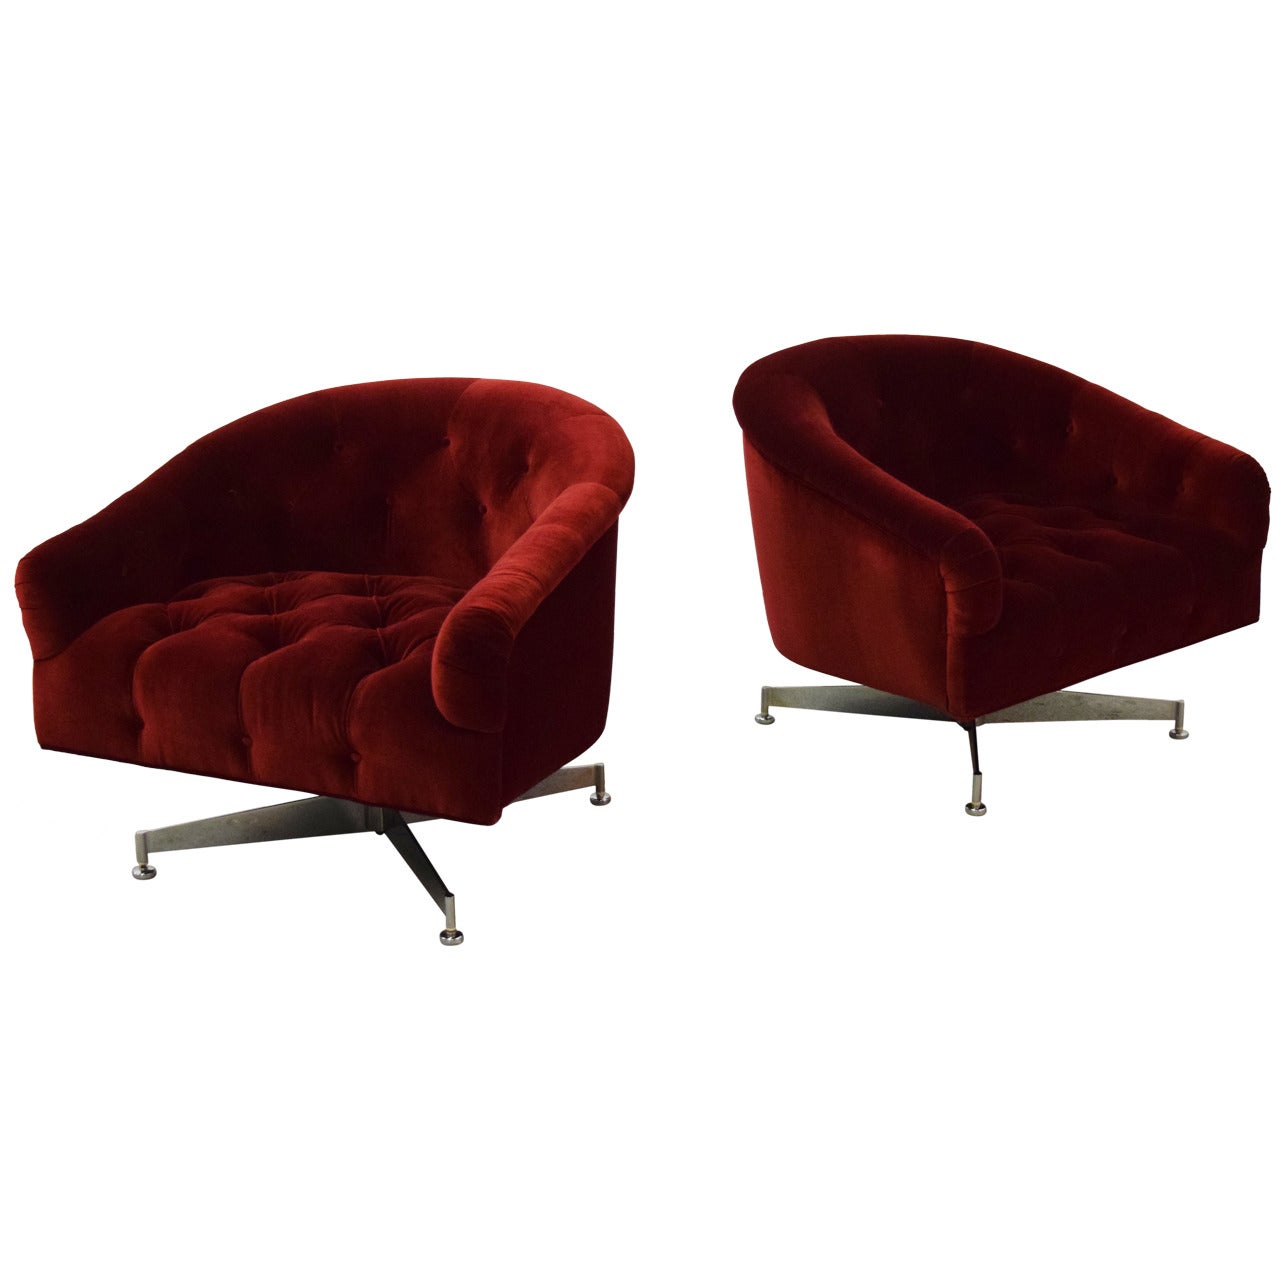 Pair of Ward Bennett Tufted Lounge Chairs